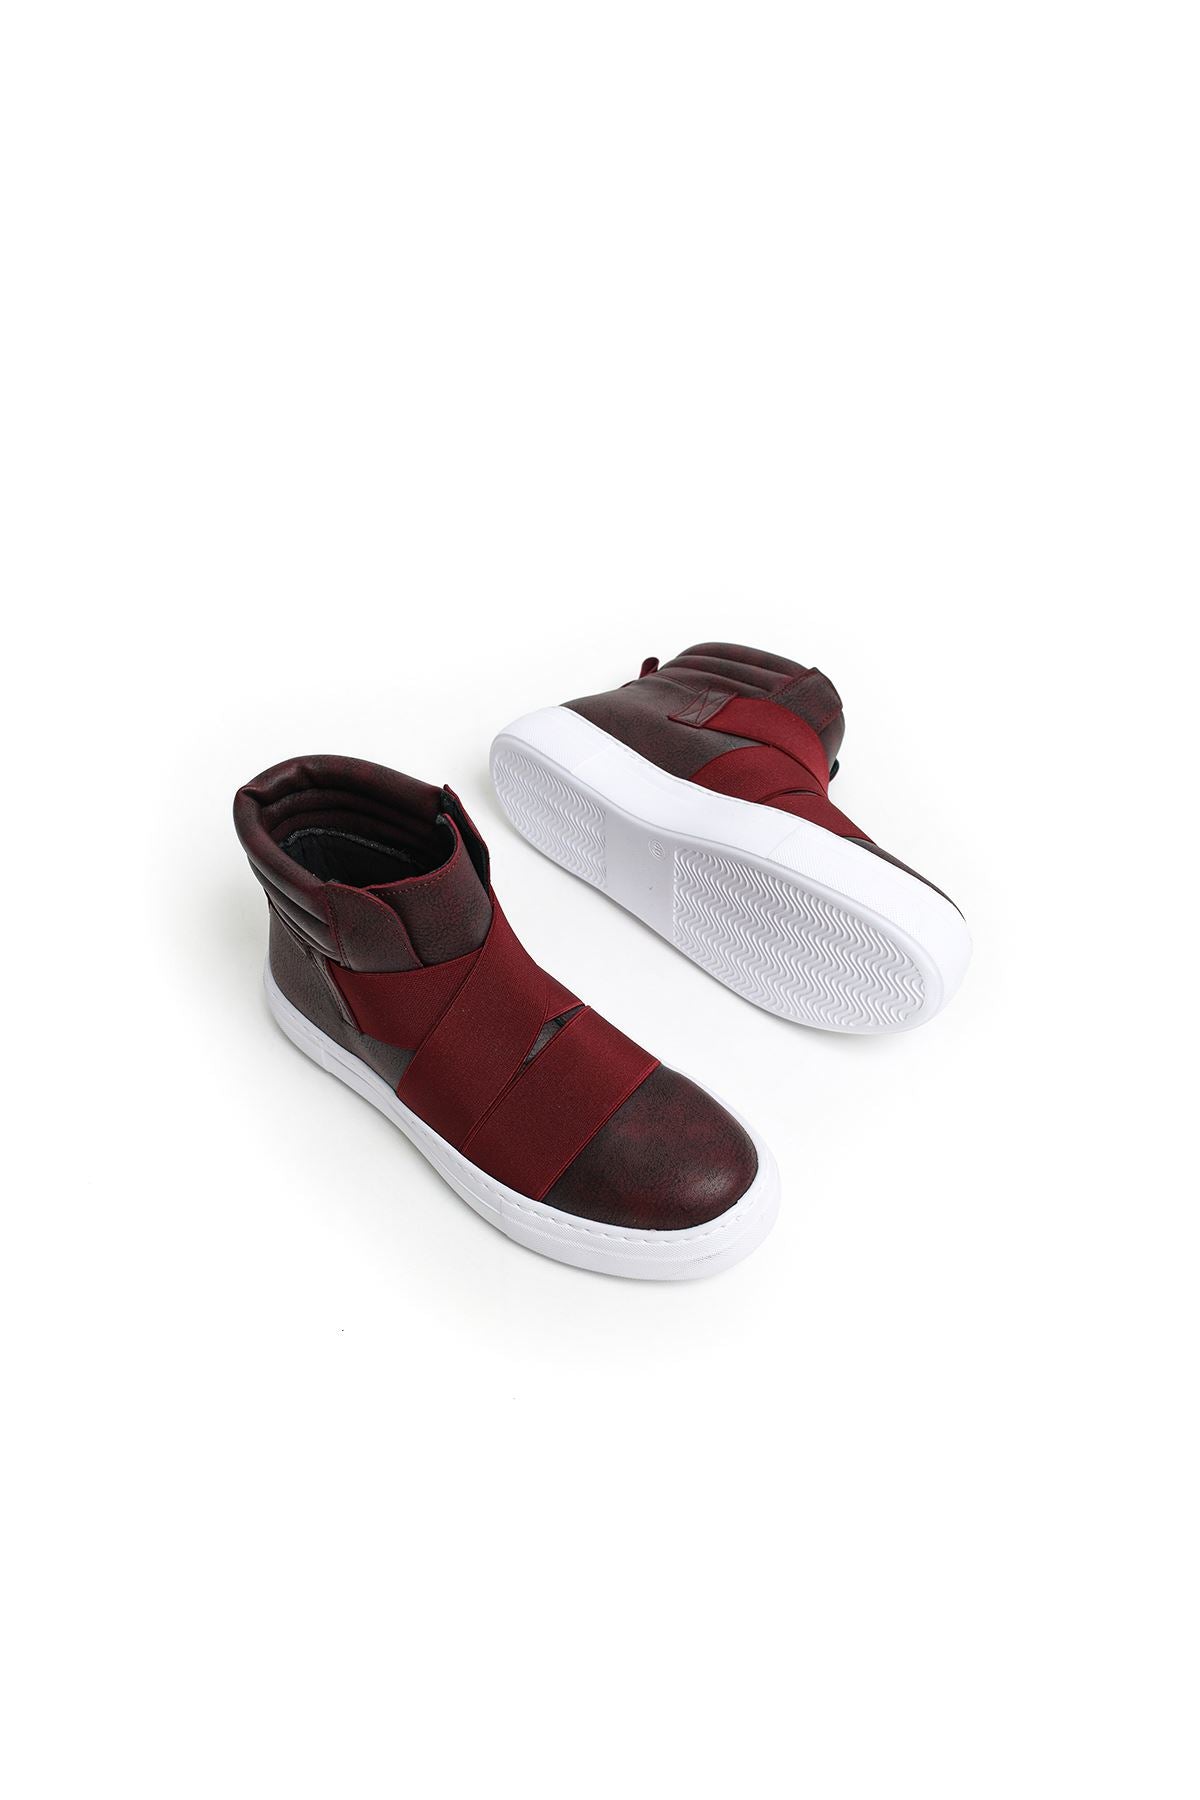 CH023 Men's Banded Red-White Sole Casual Sneaker Boots - STREET MODE ™